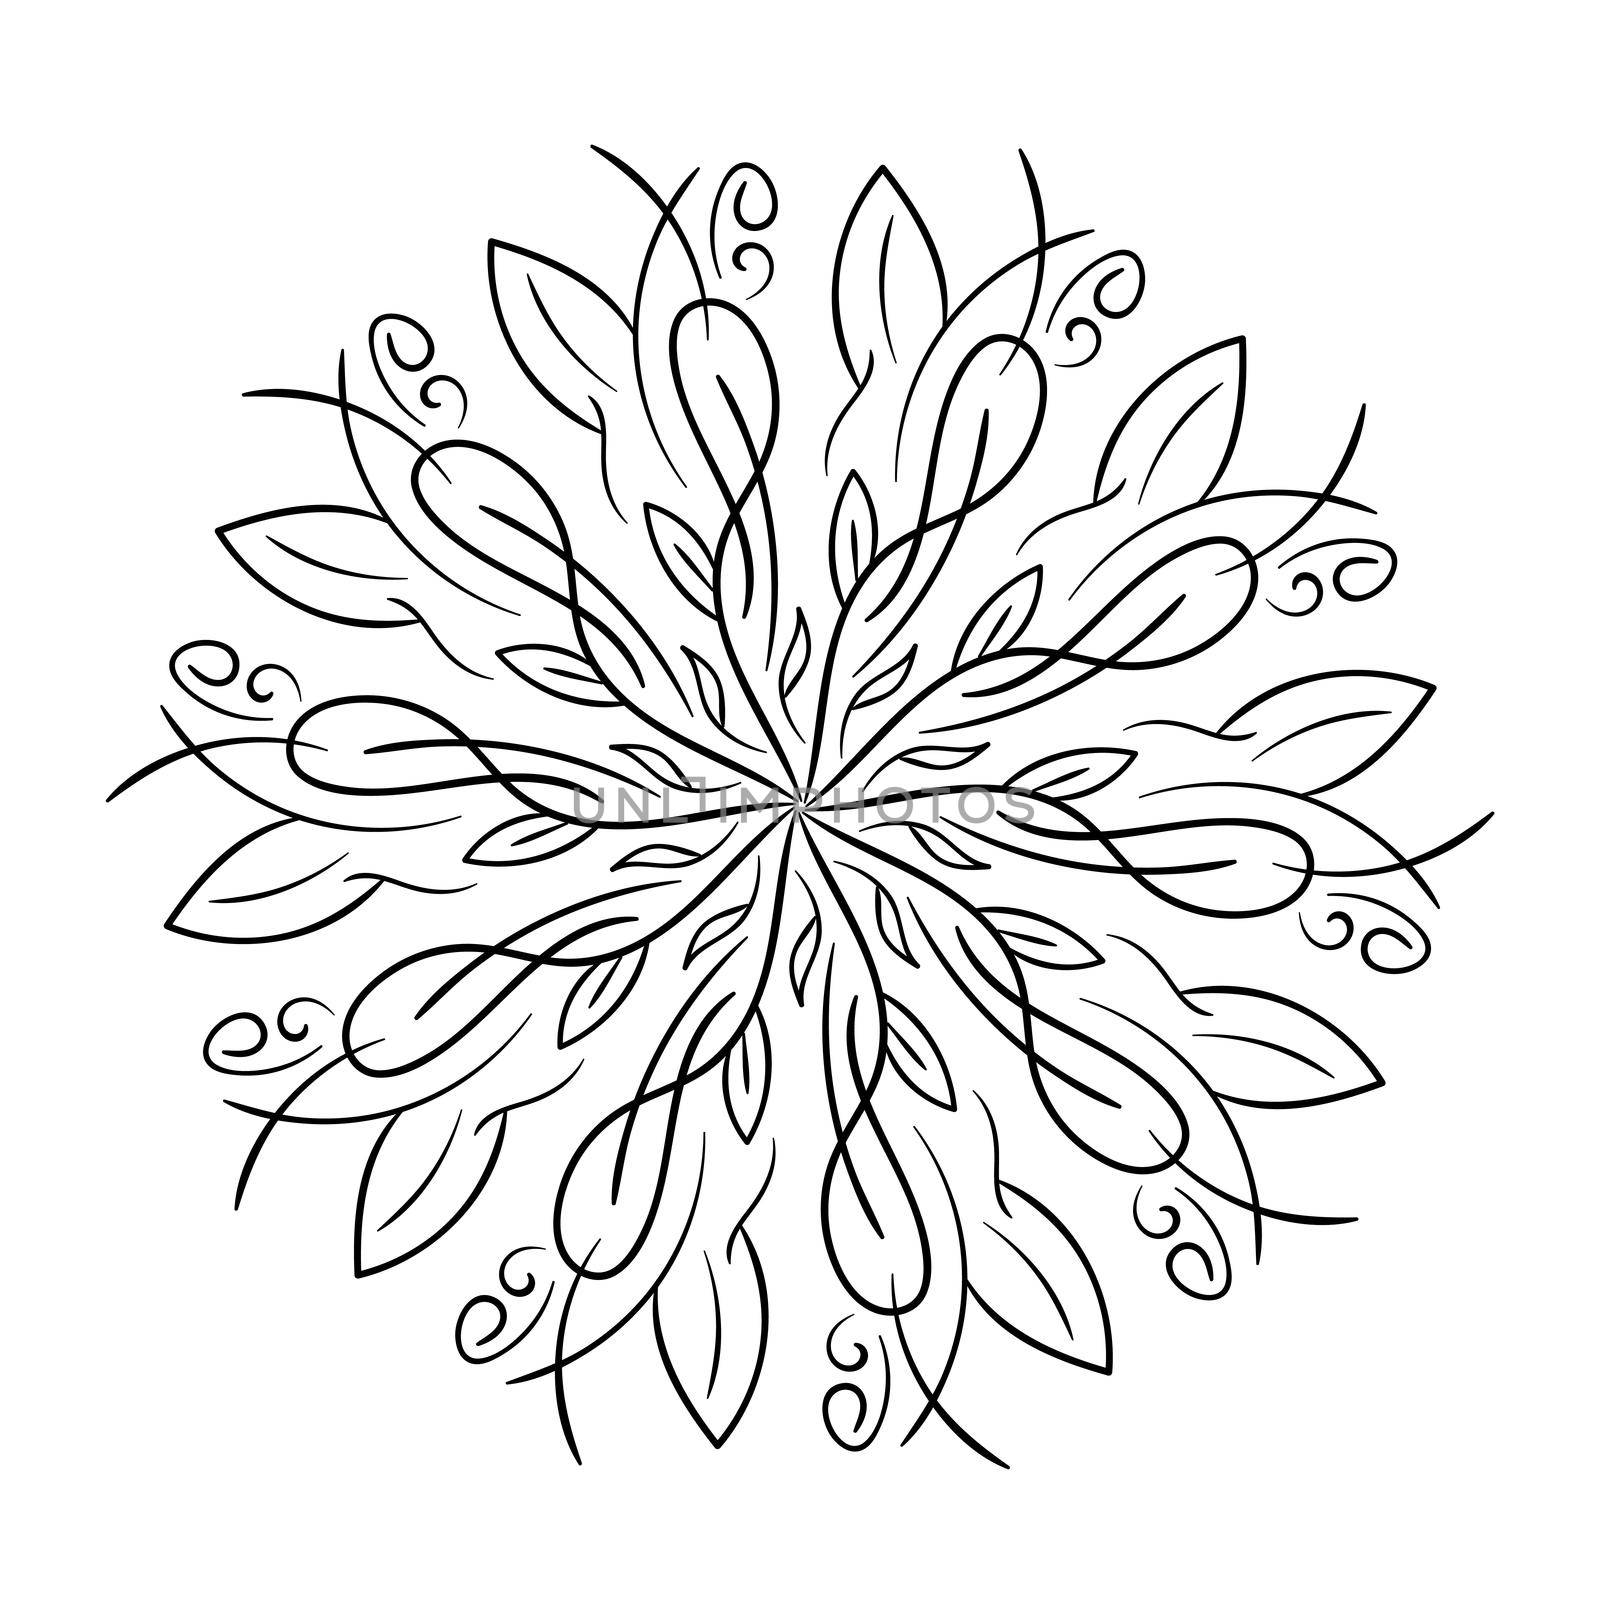 Floral mandala with leaves and hearts on a white background. Minimalistic mandala for decoration and decoration